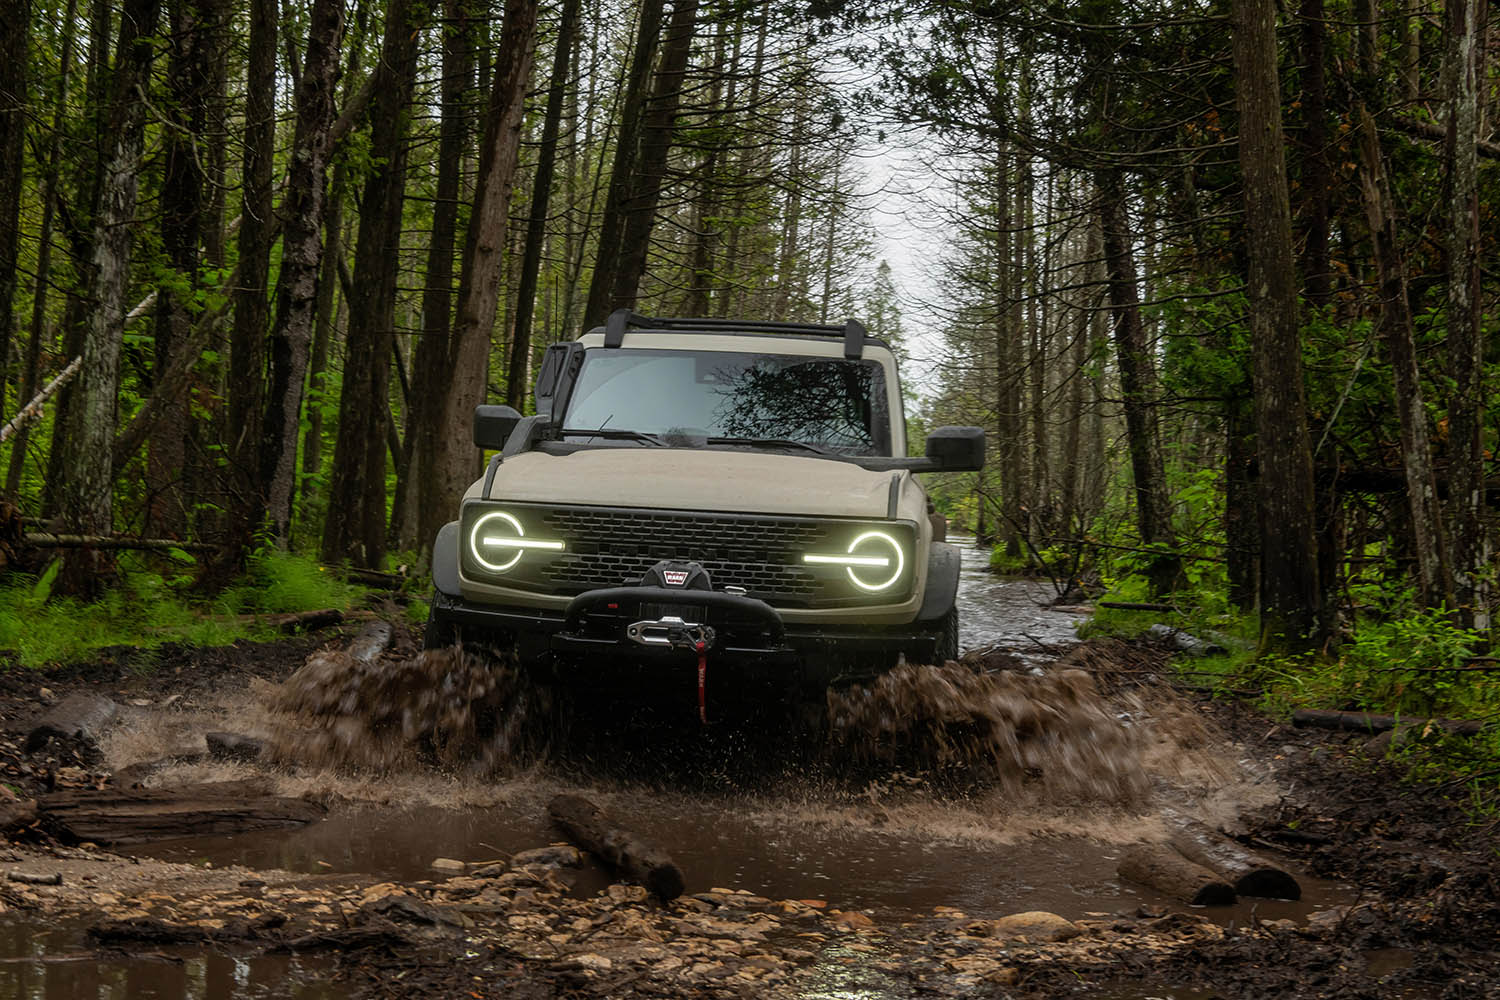 Ford Bronco driving through muddy water